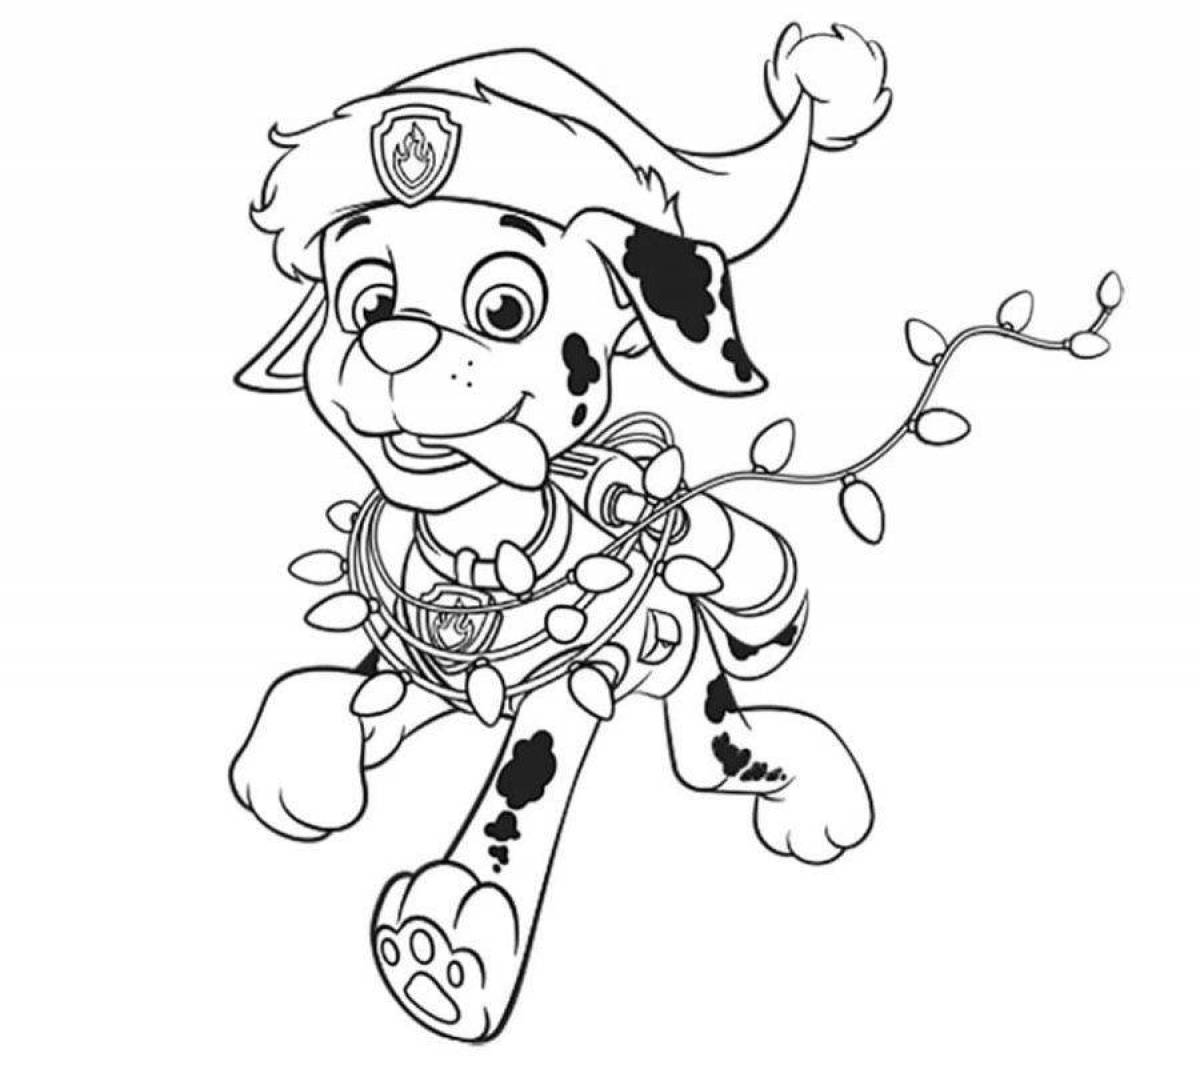 Paw patrol live coloring new year